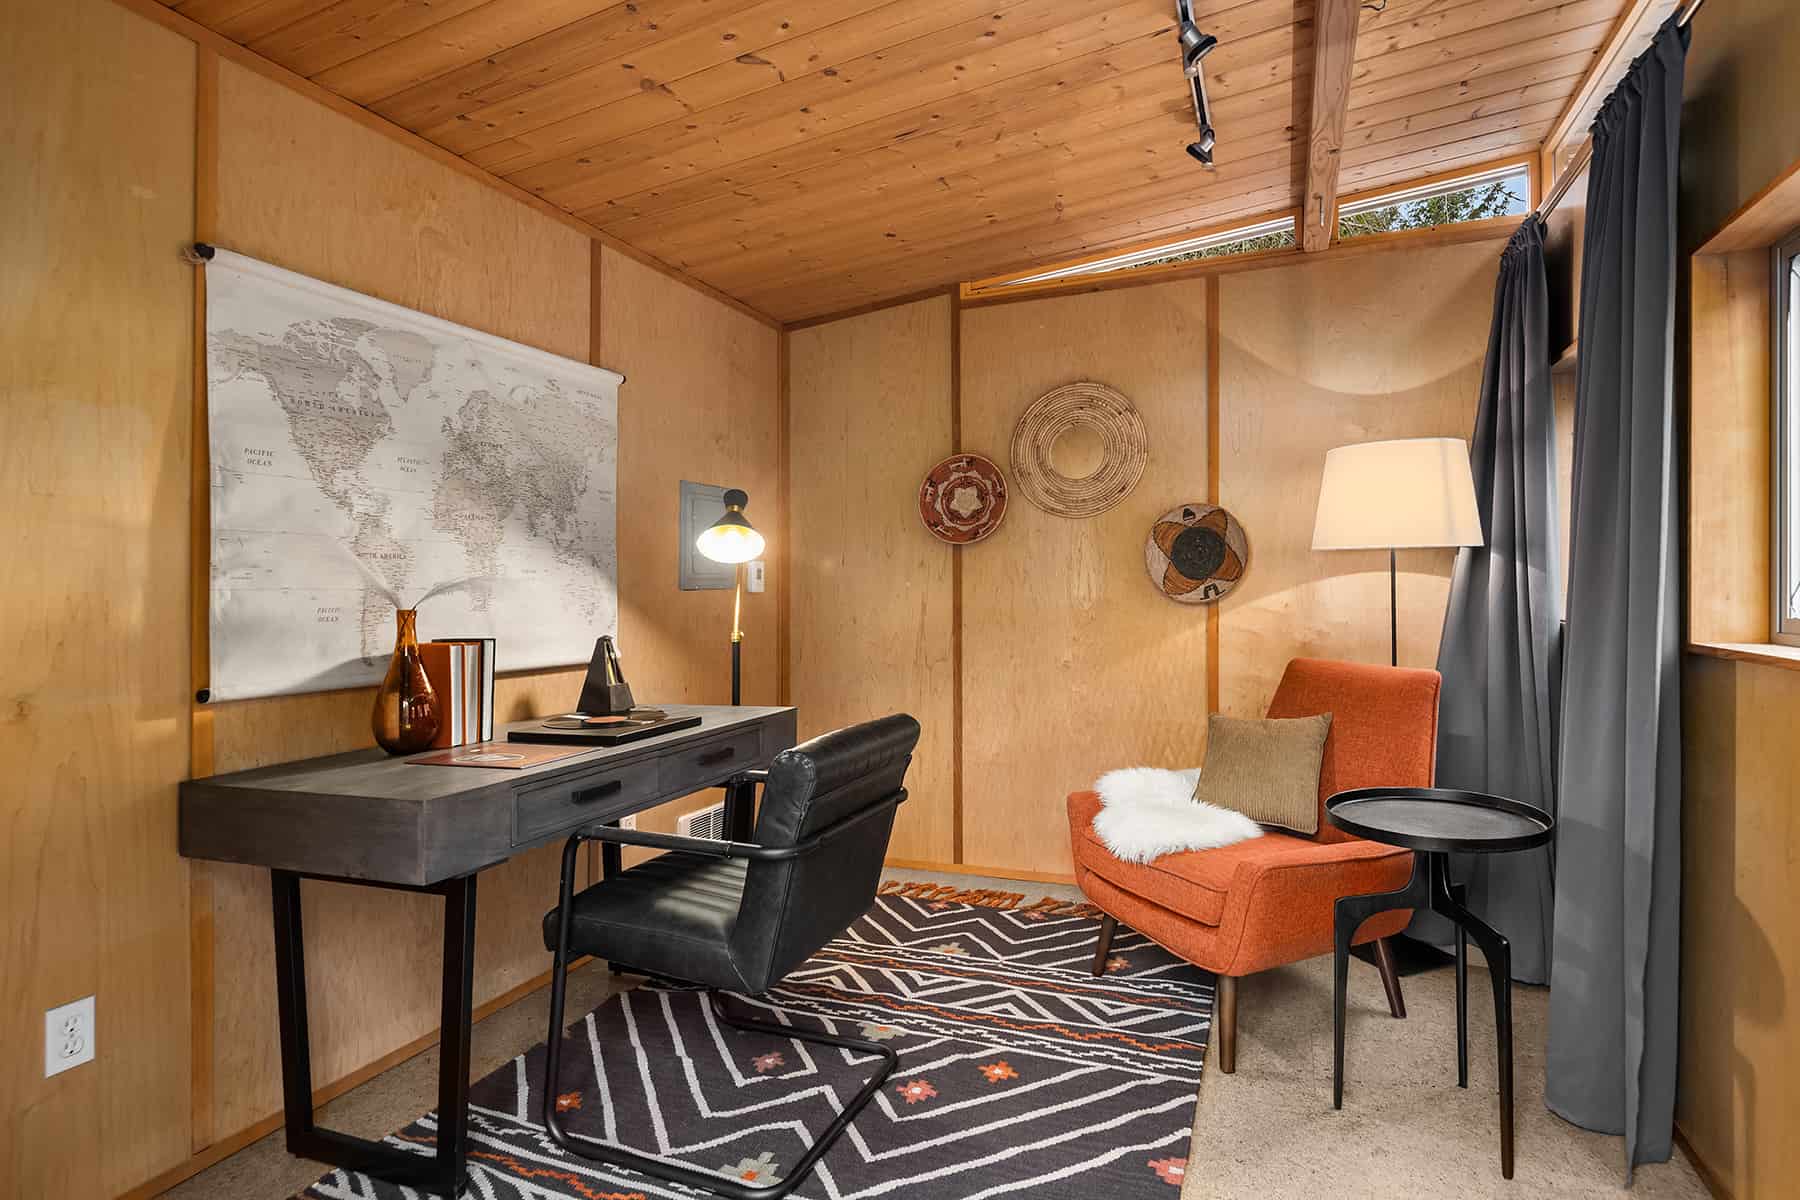 outdoor den staged as a home midcentury style home office with gray and orange accents and a map on the wall